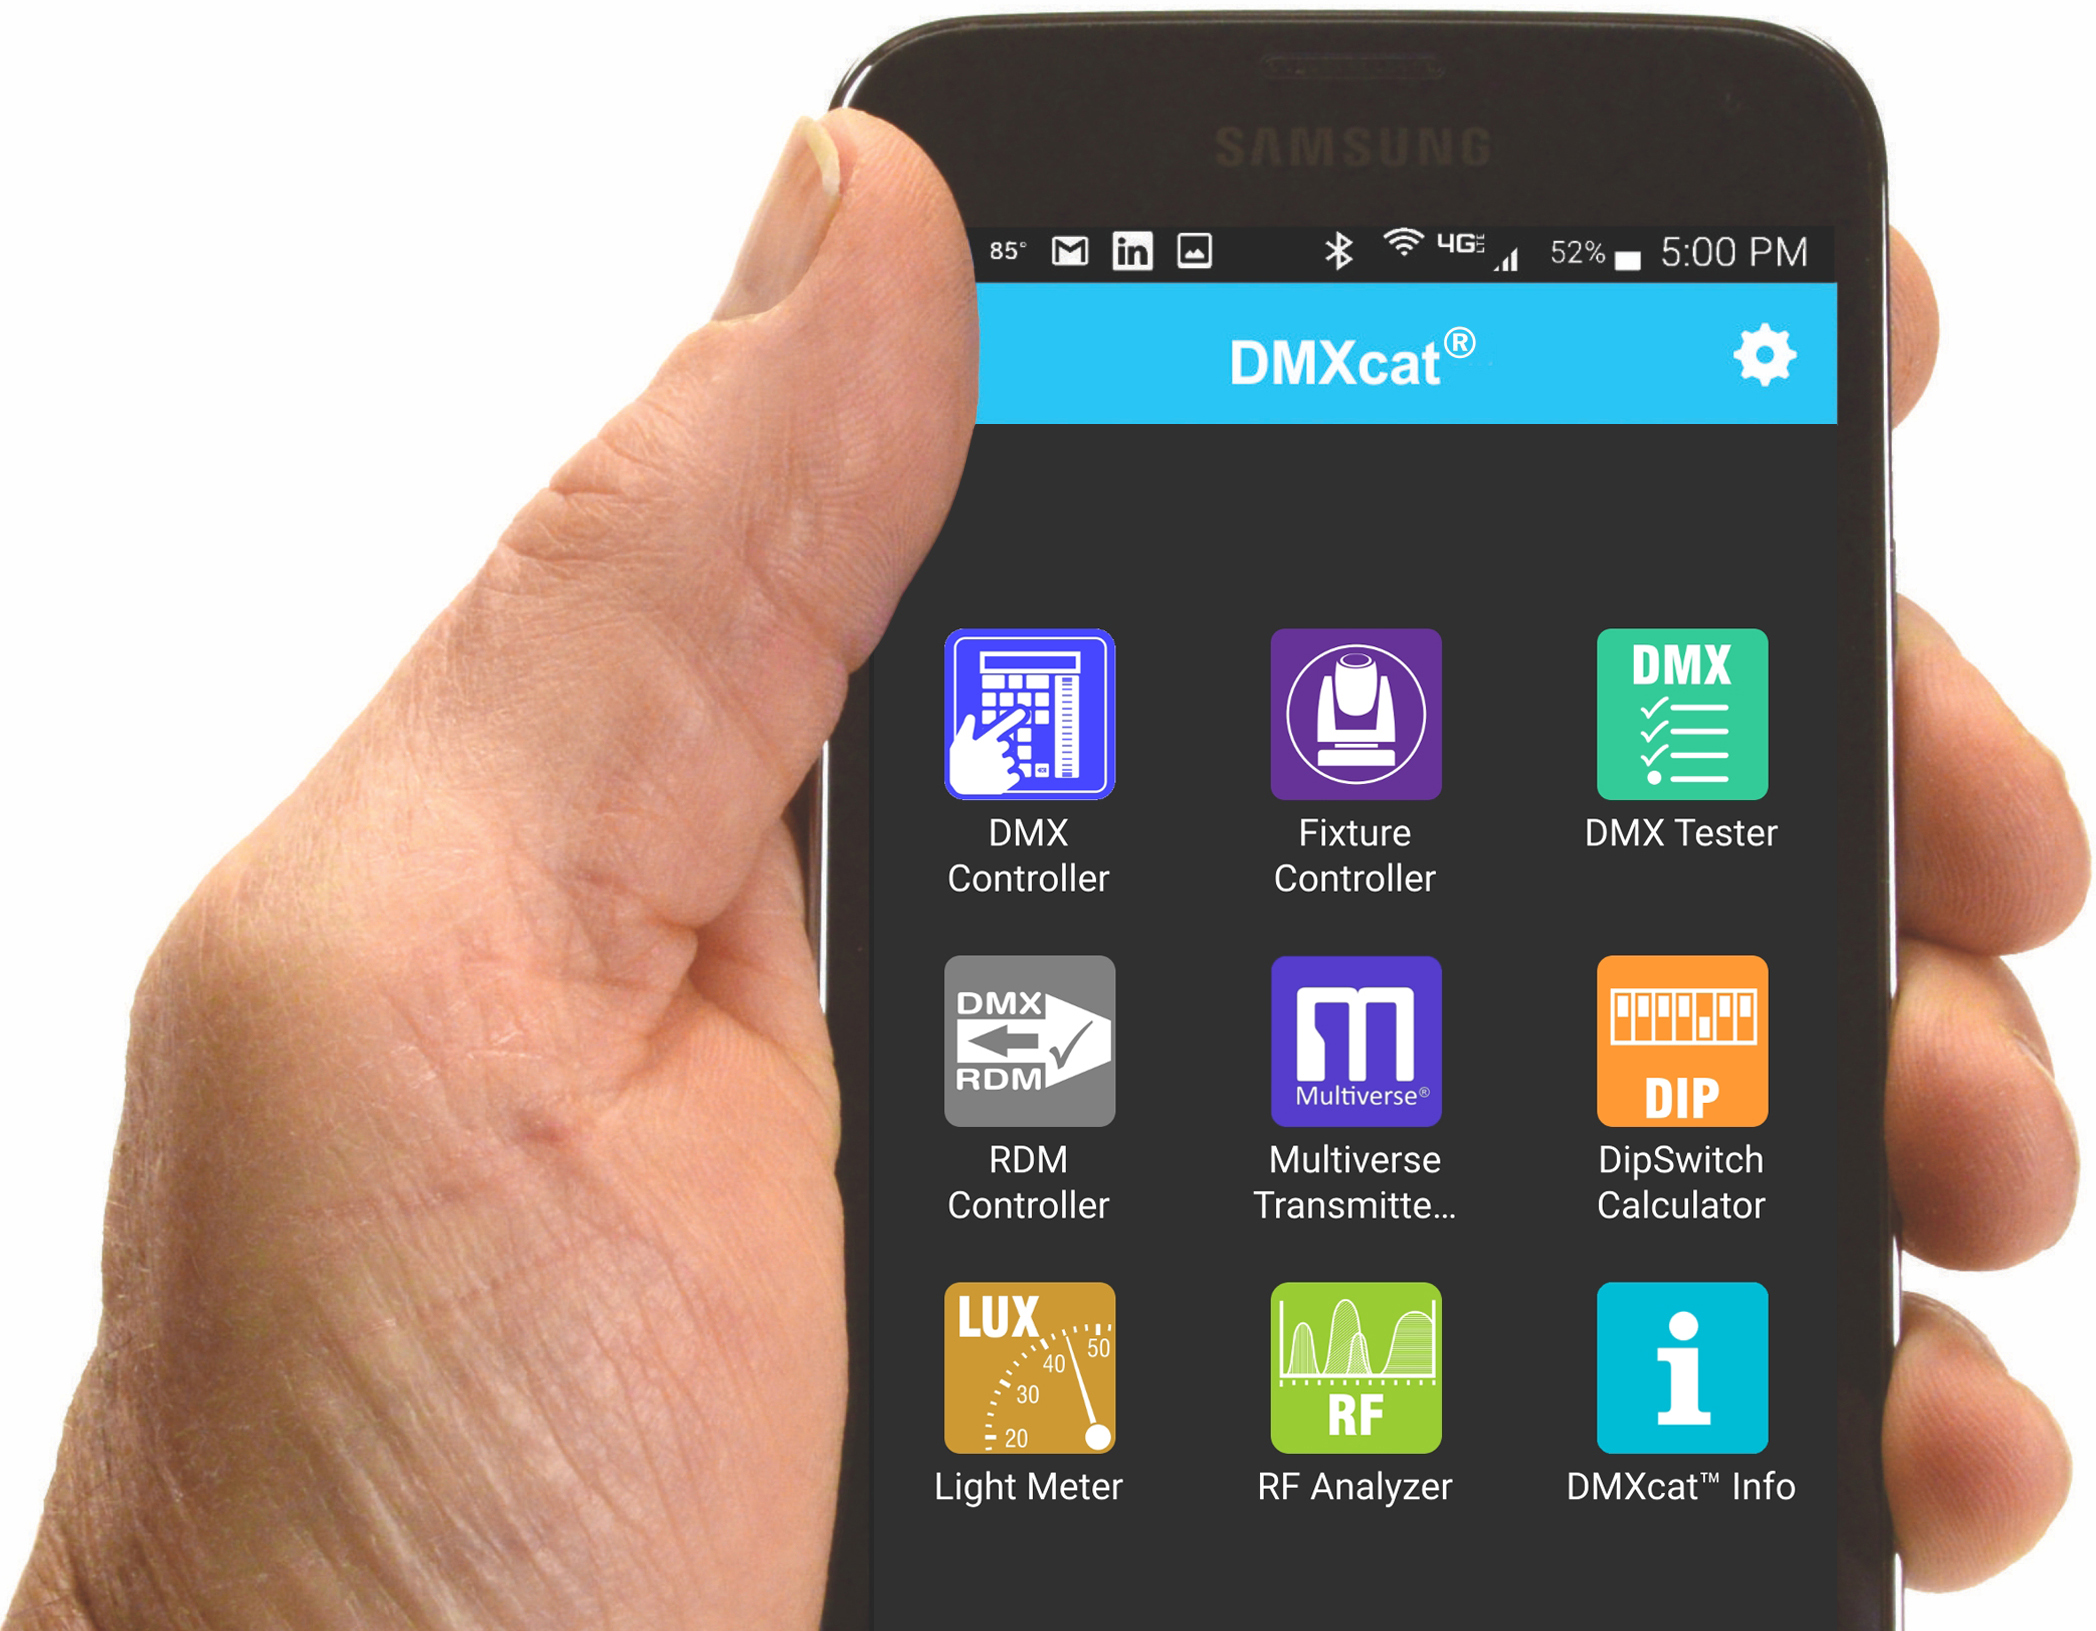 Holding the DMXcat app while connected to a Multiverse Transmitter